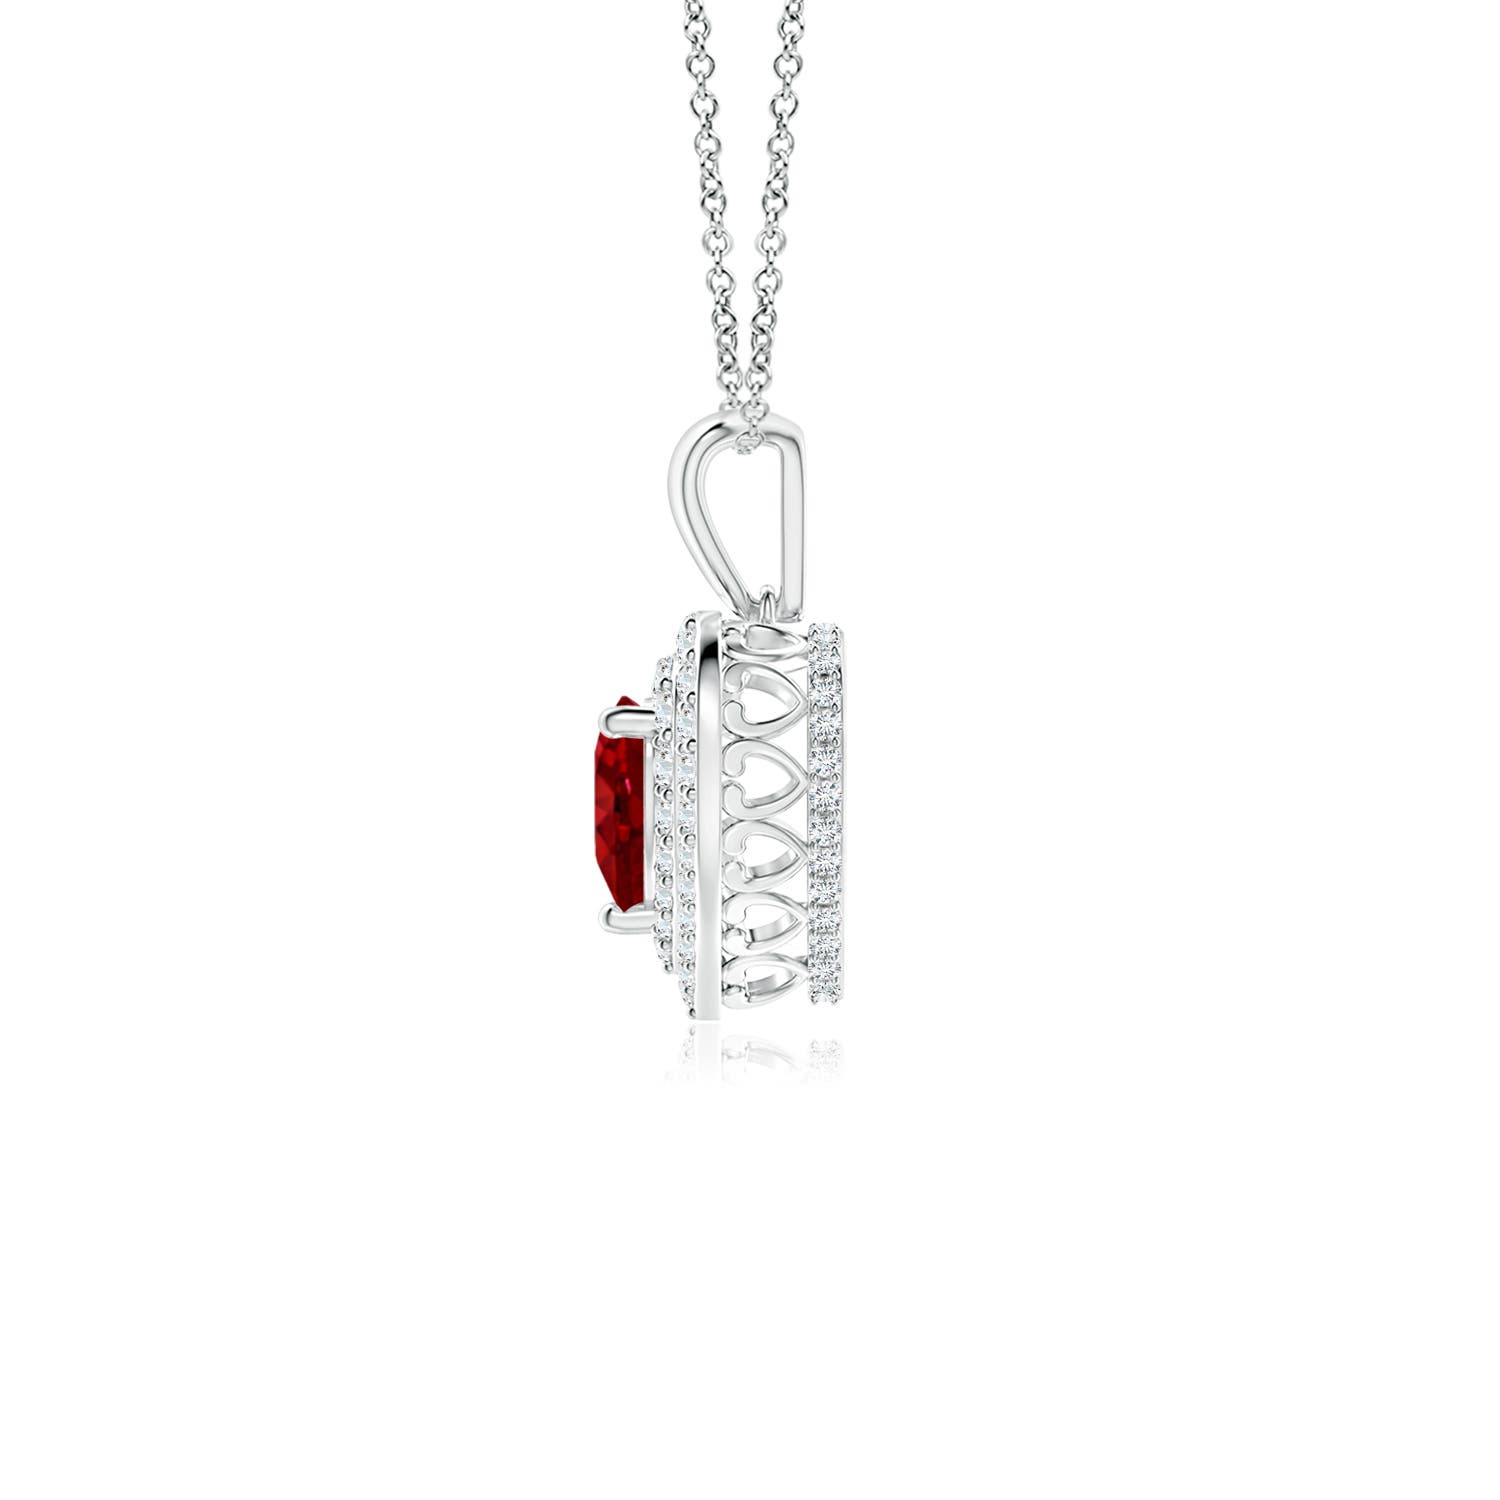 AAAA - Ruby / 0.94 CT / 14 KT White Gold